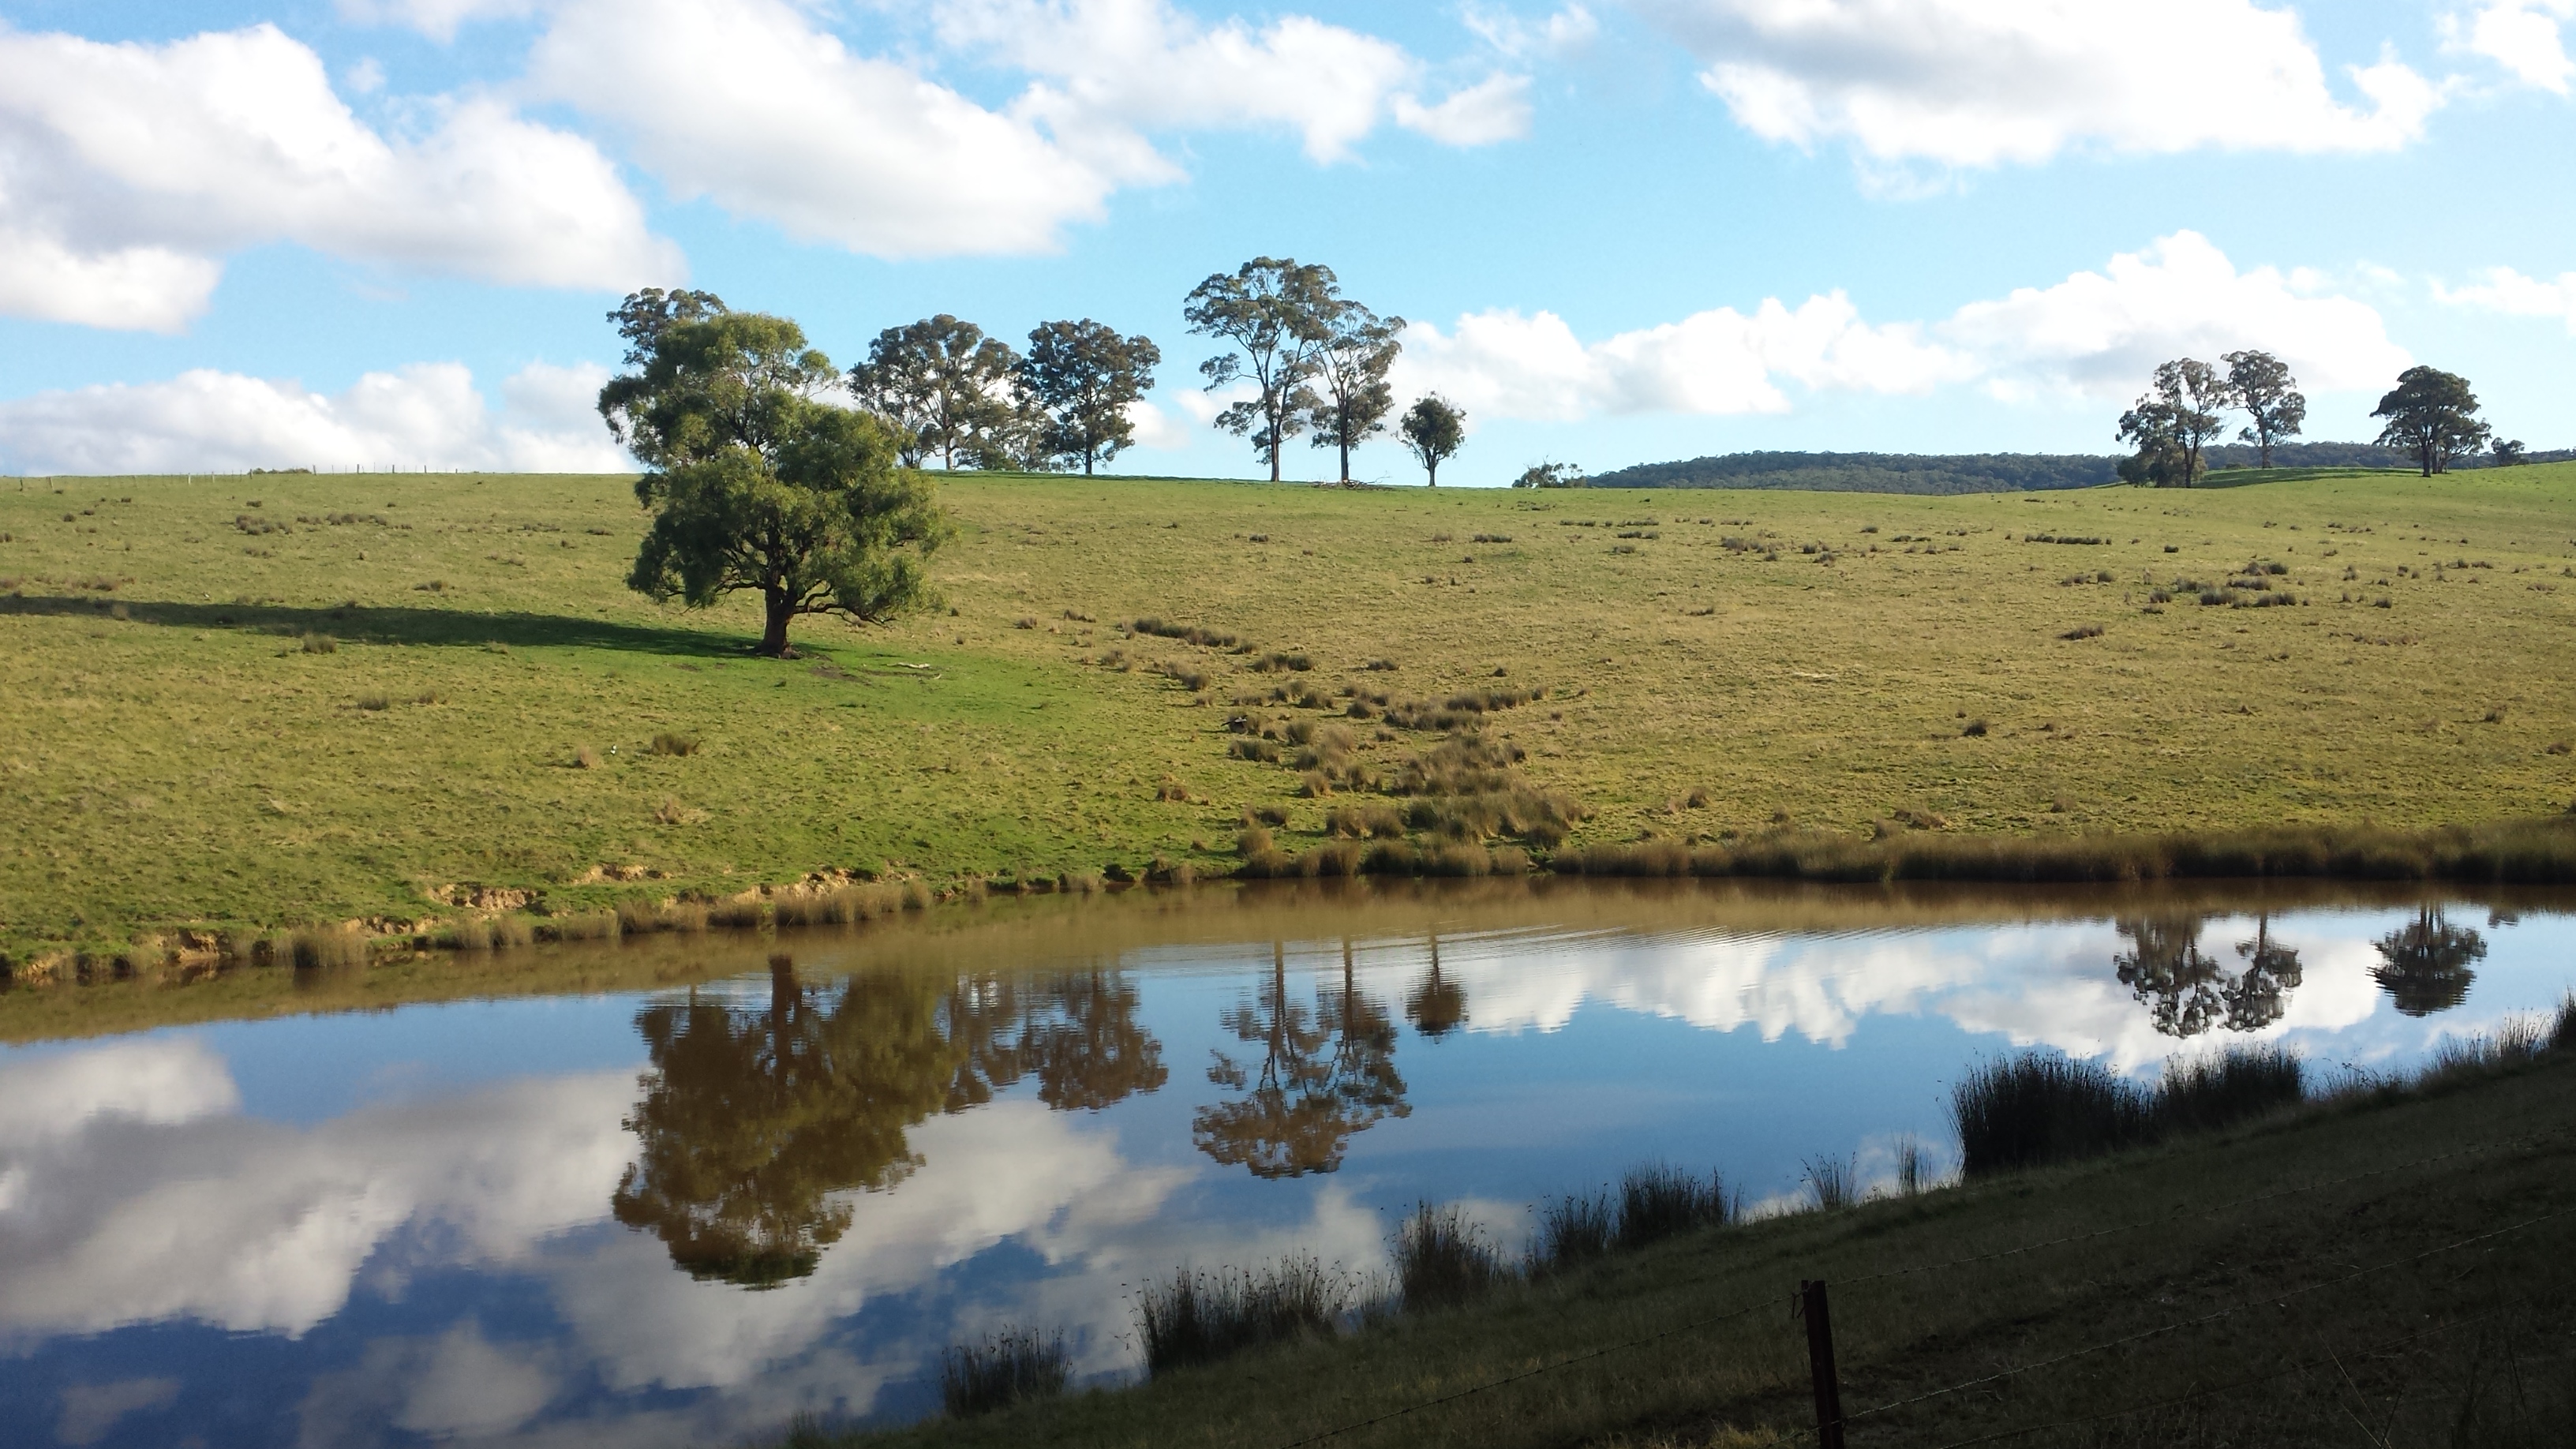 Green hills, dam with reflections of trees, blue sky and white
clouds